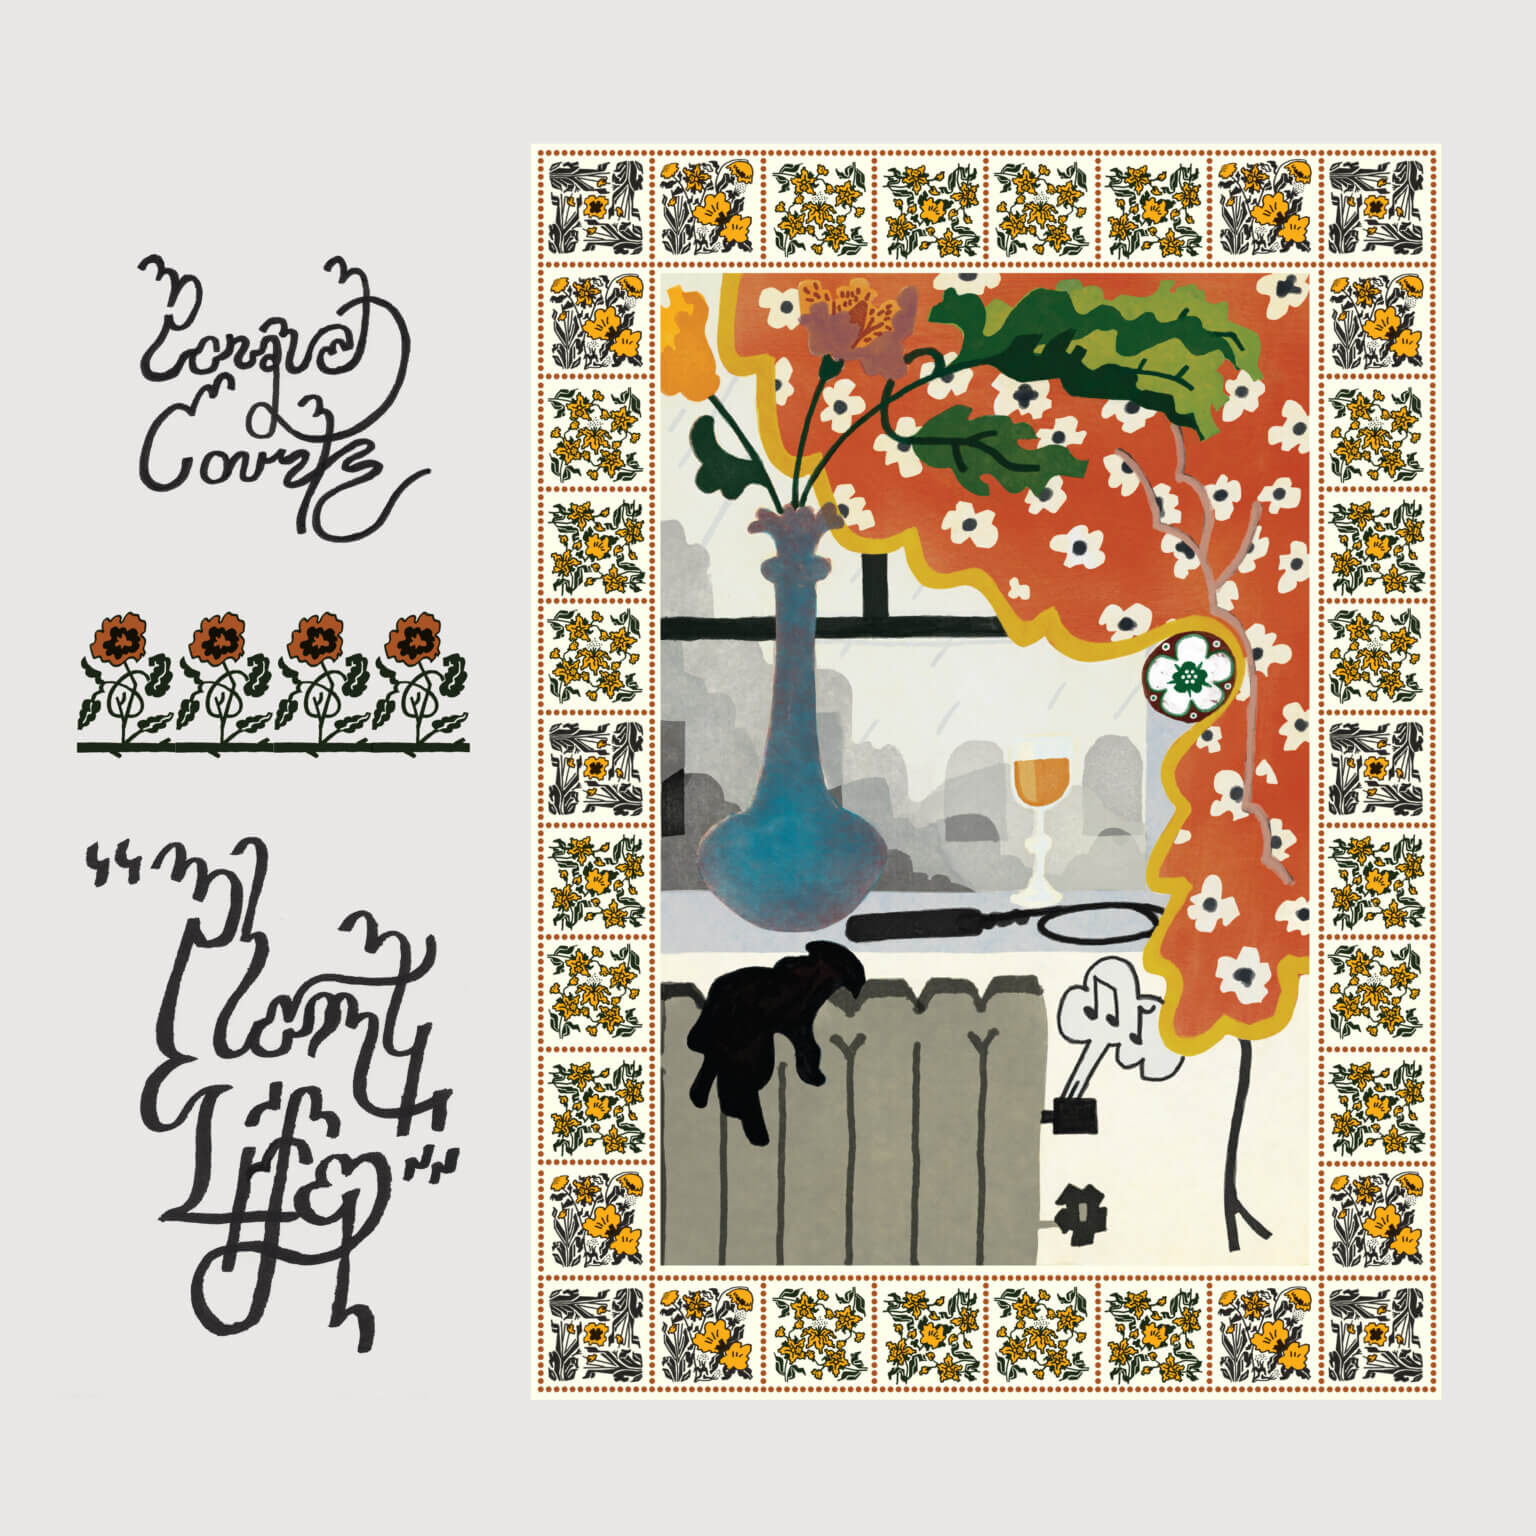 Parquet Courts Drop Limited Edition "Plant Life" 12" & Announce North American Tour. The EP is available, today via Rough Trade Records